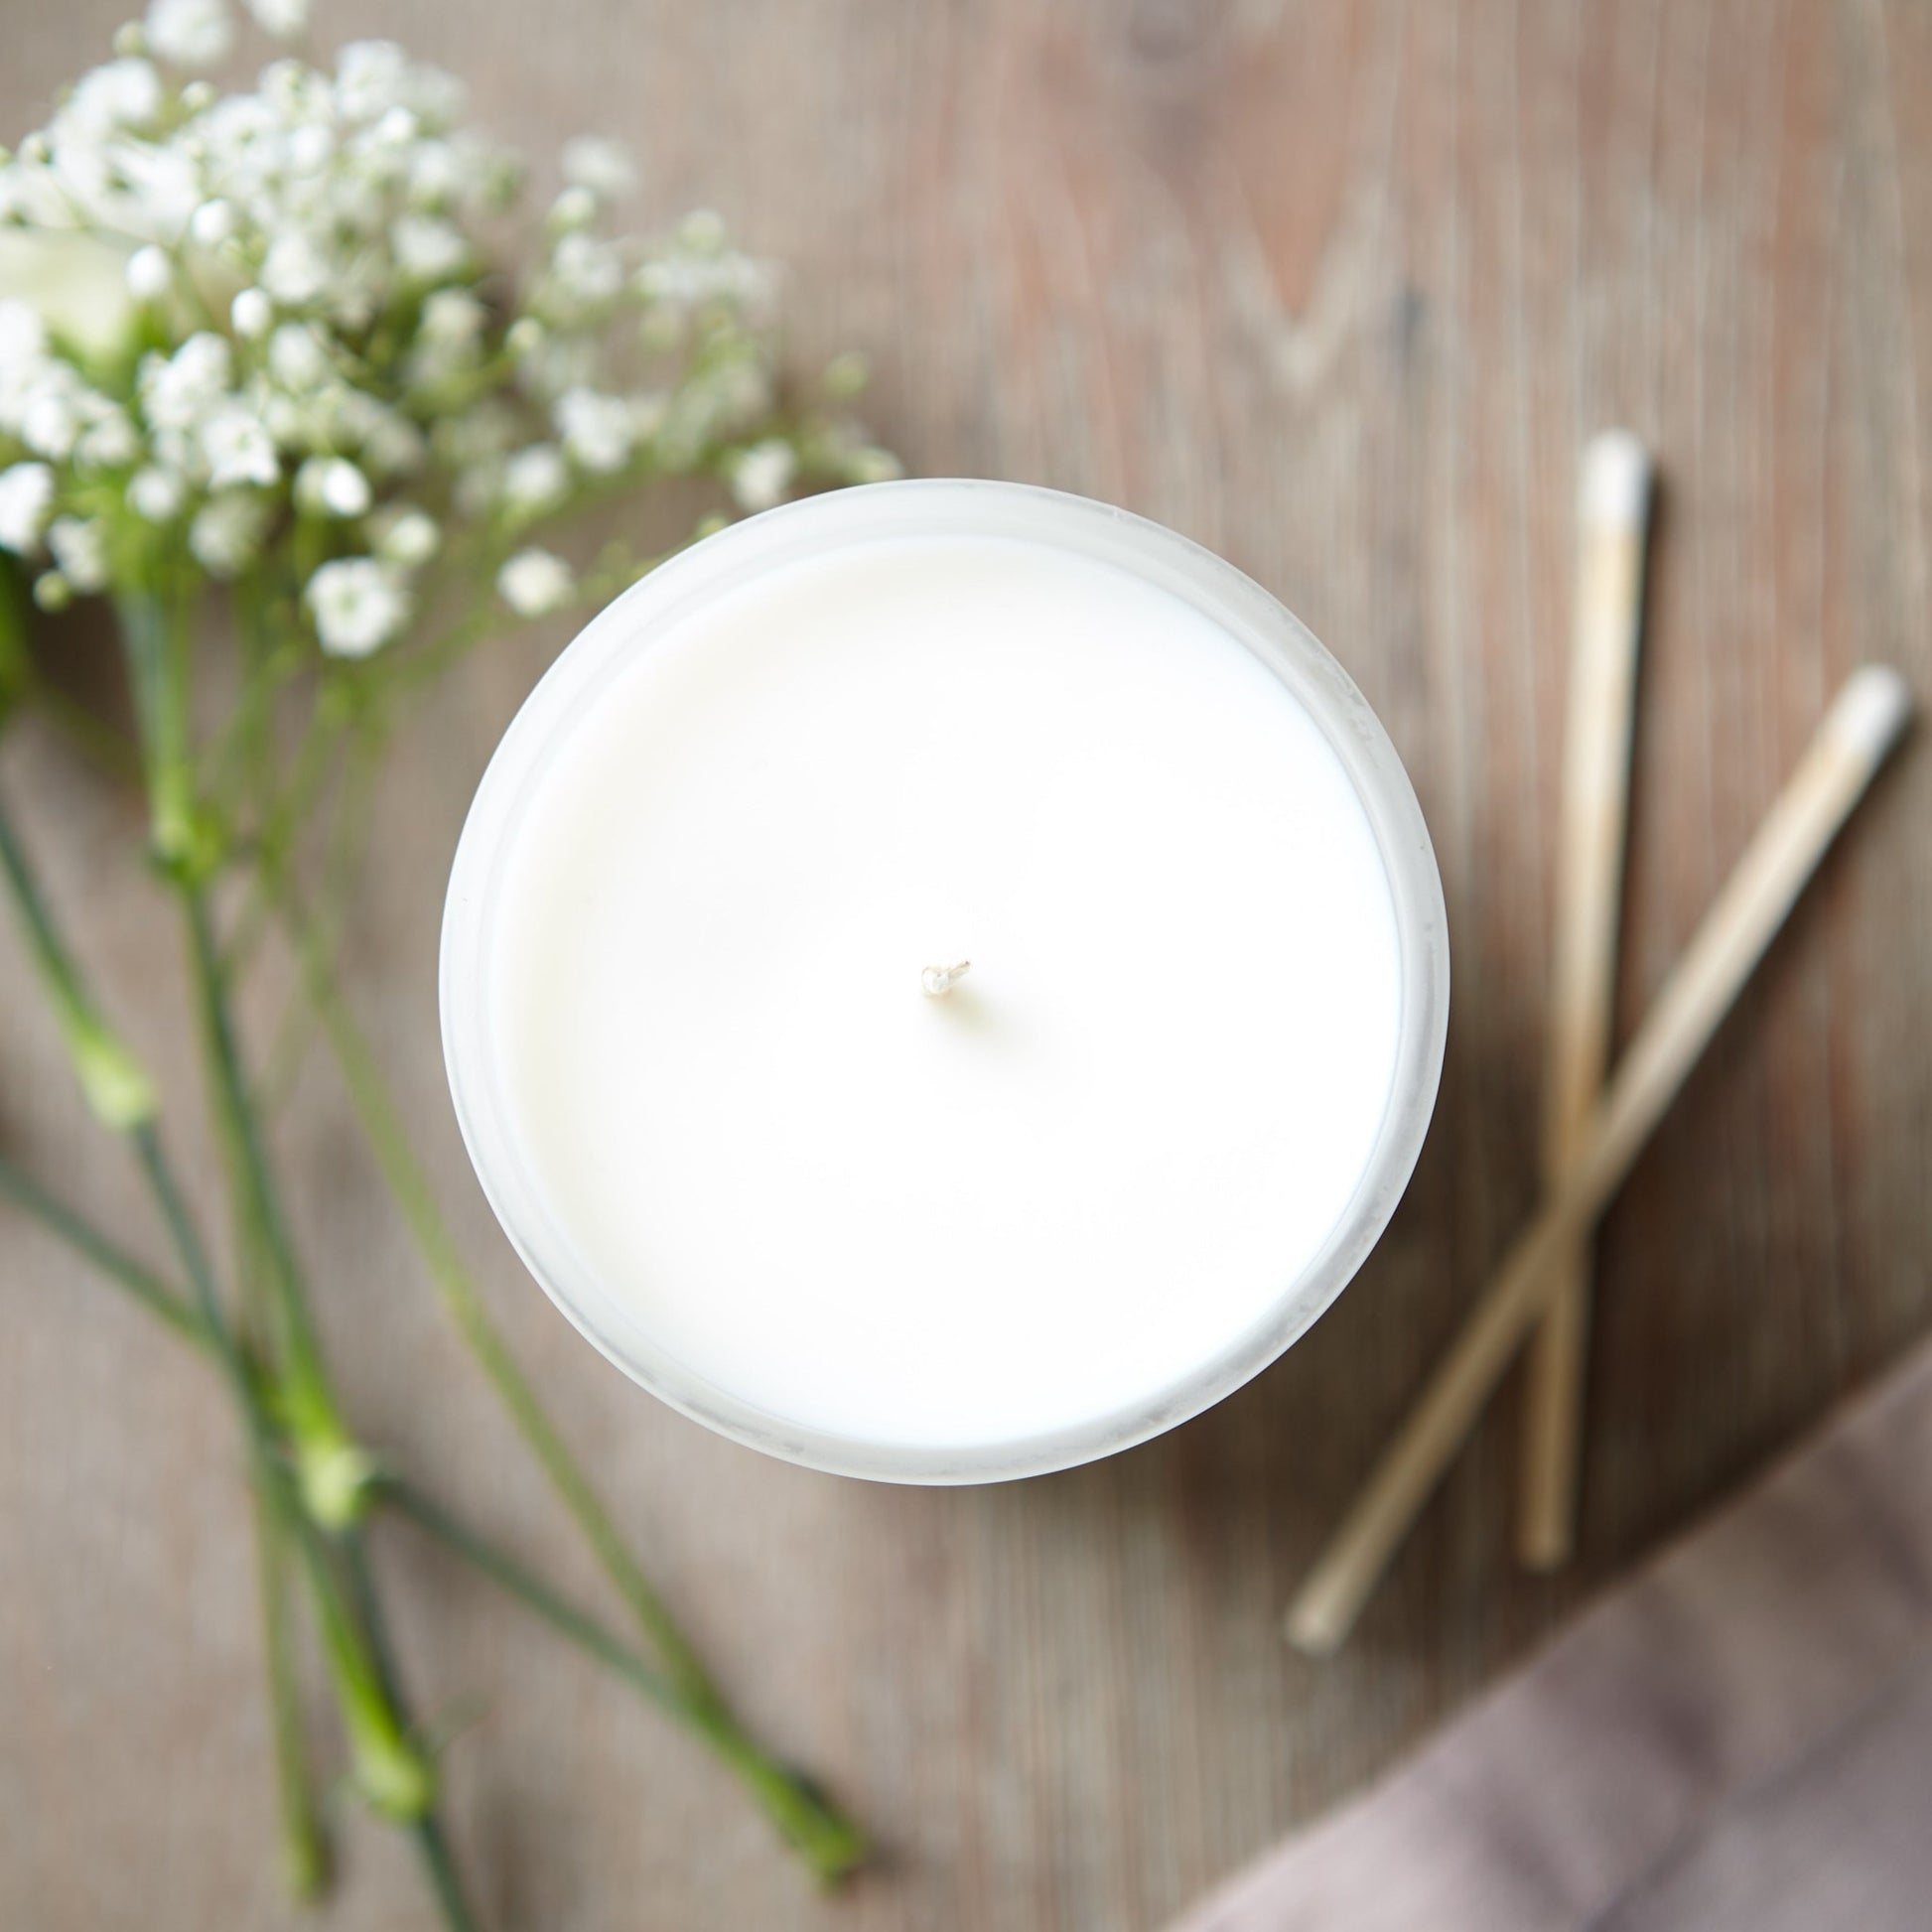 New Mum Gift Candle - Kindred Fires